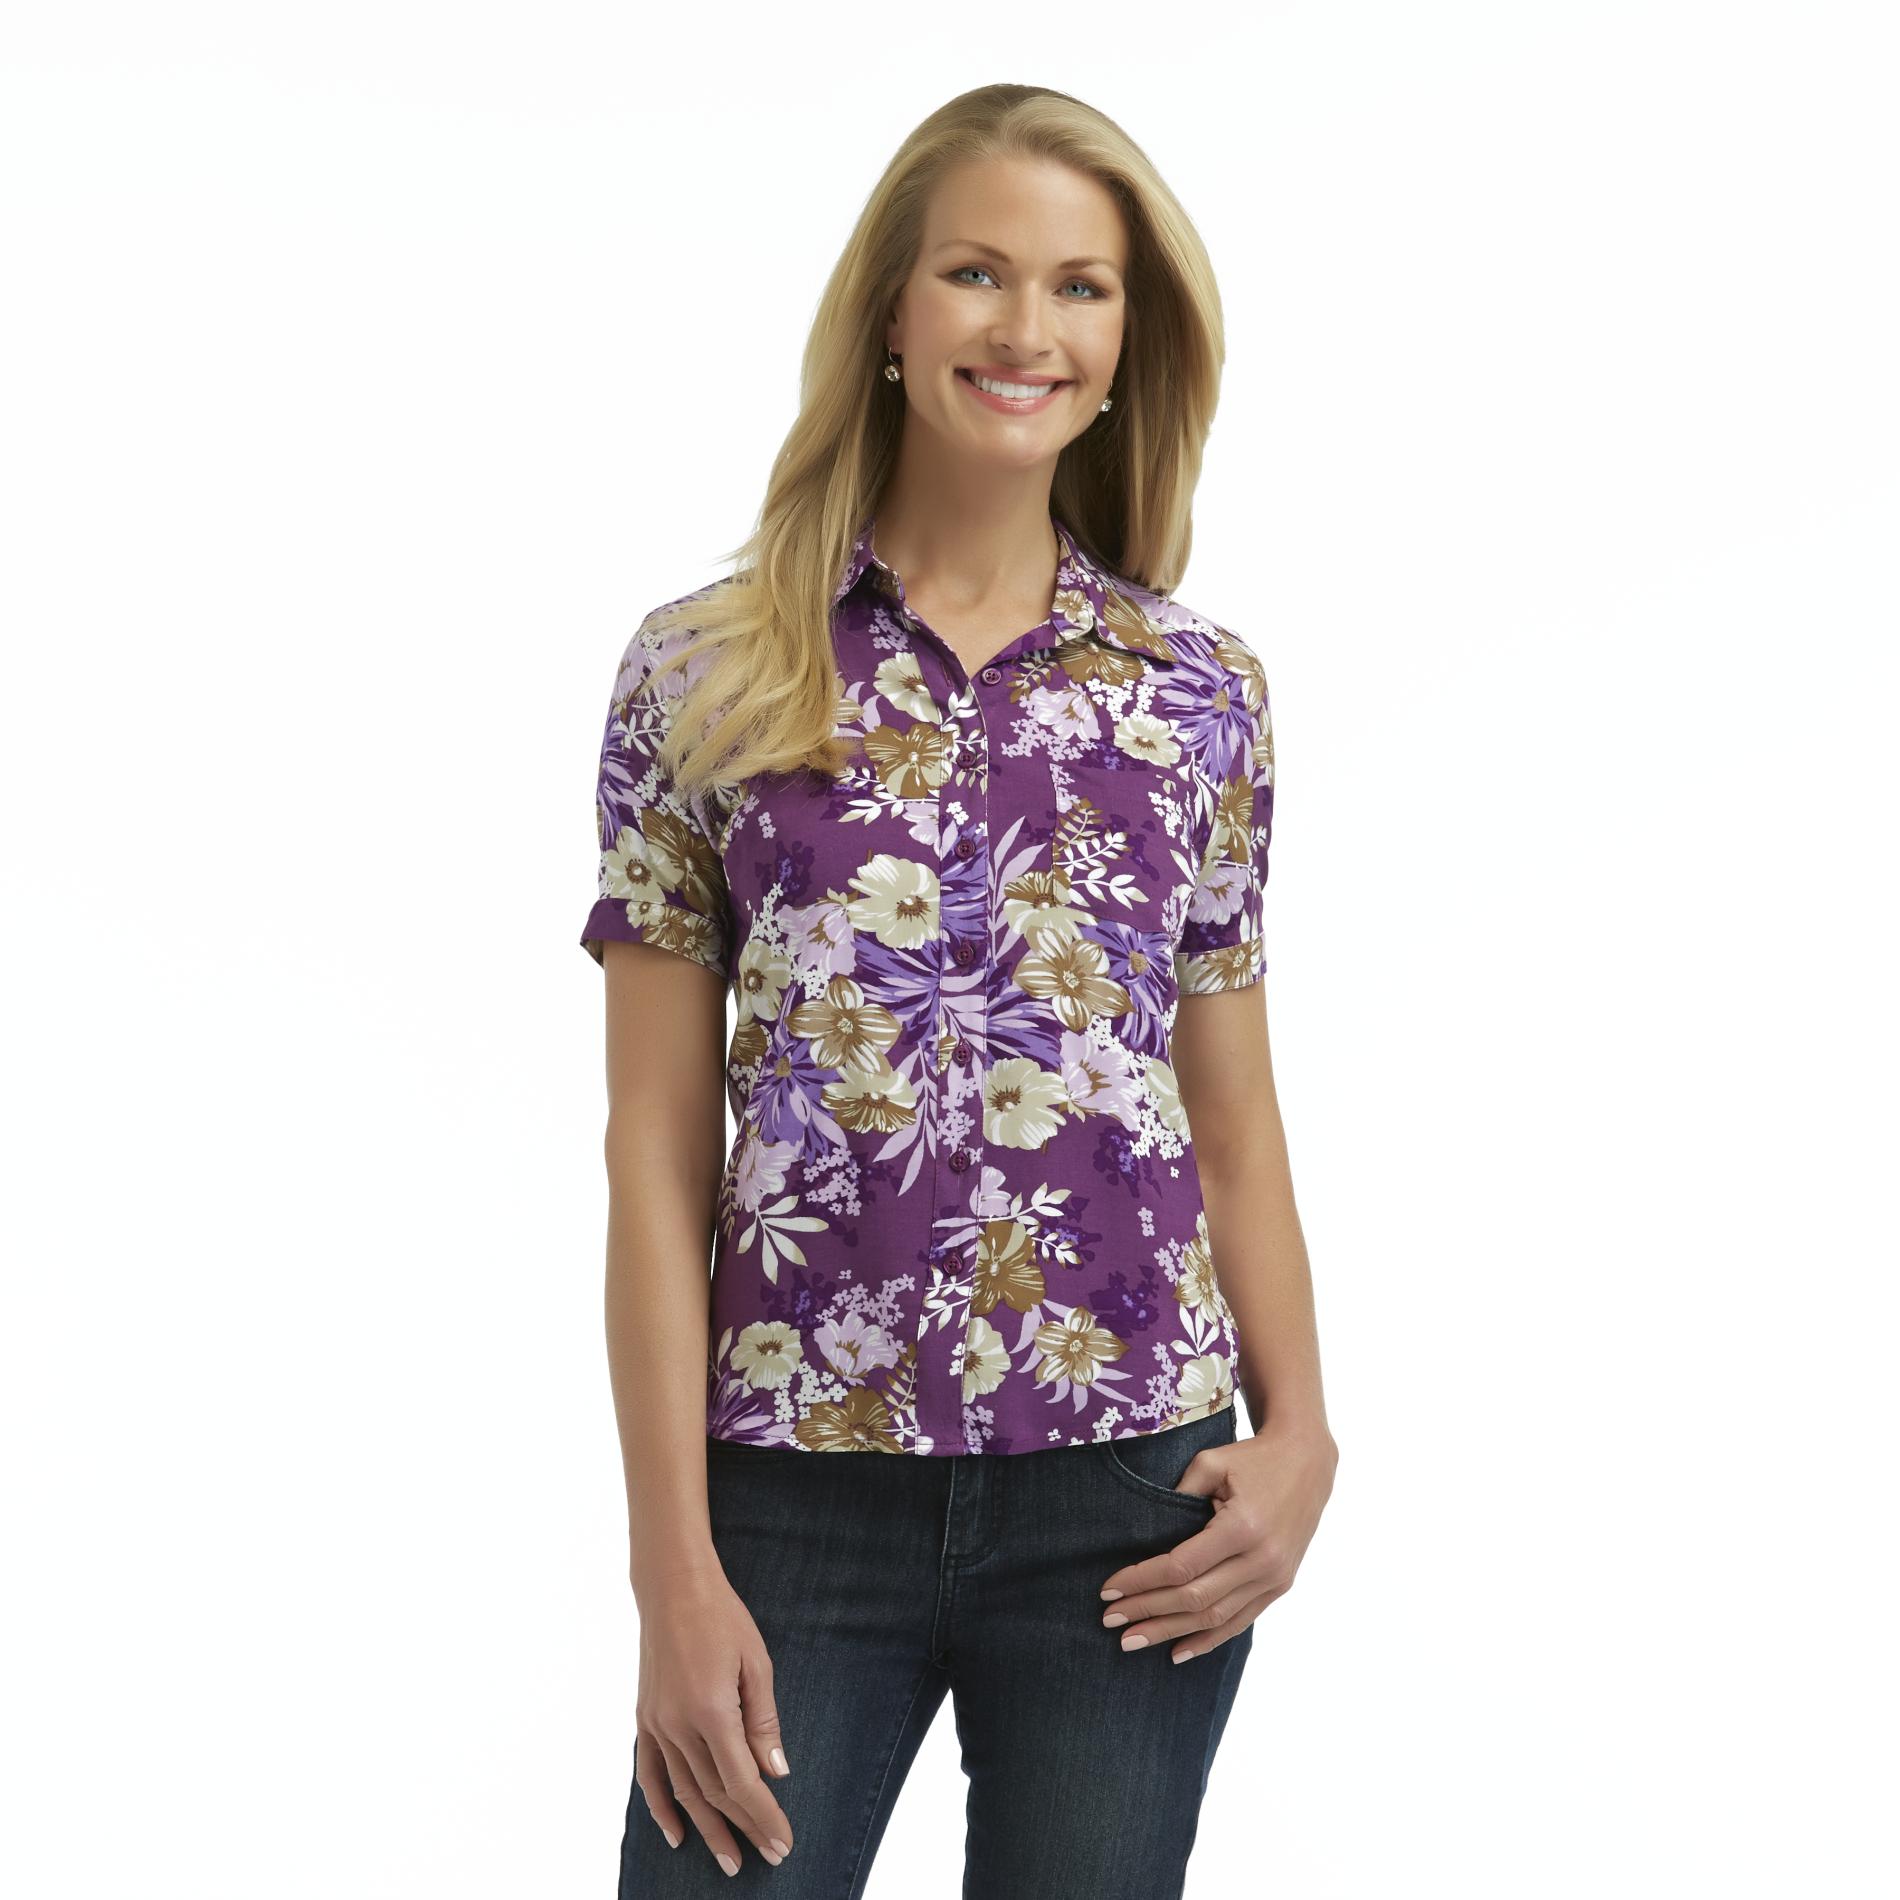 Basic Editions Women's Camp Shirt - Floral